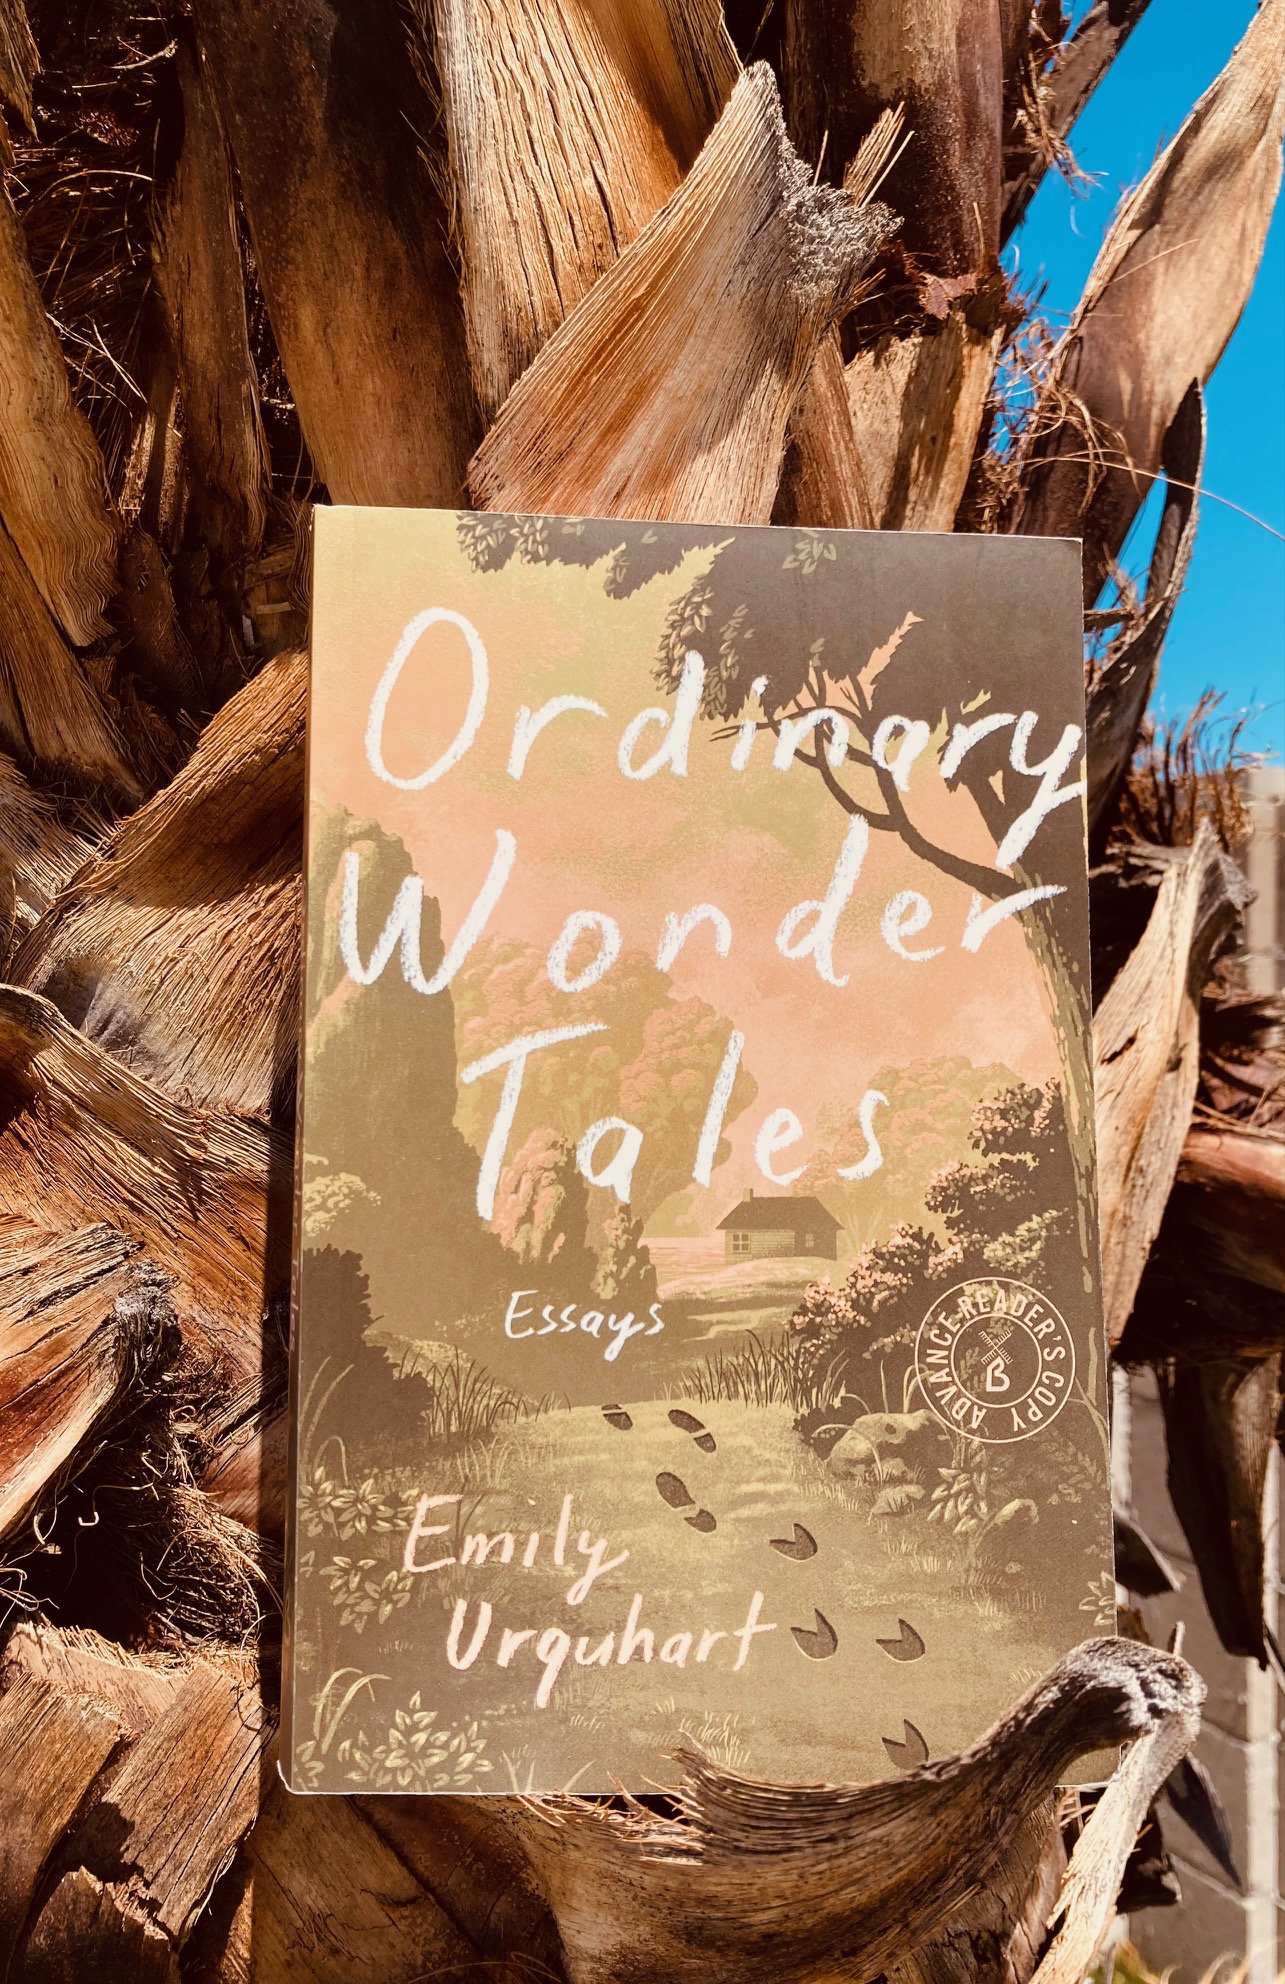 Ordinary Wonder Tales by Emily Urquhart book pictured on a palm tree trunk